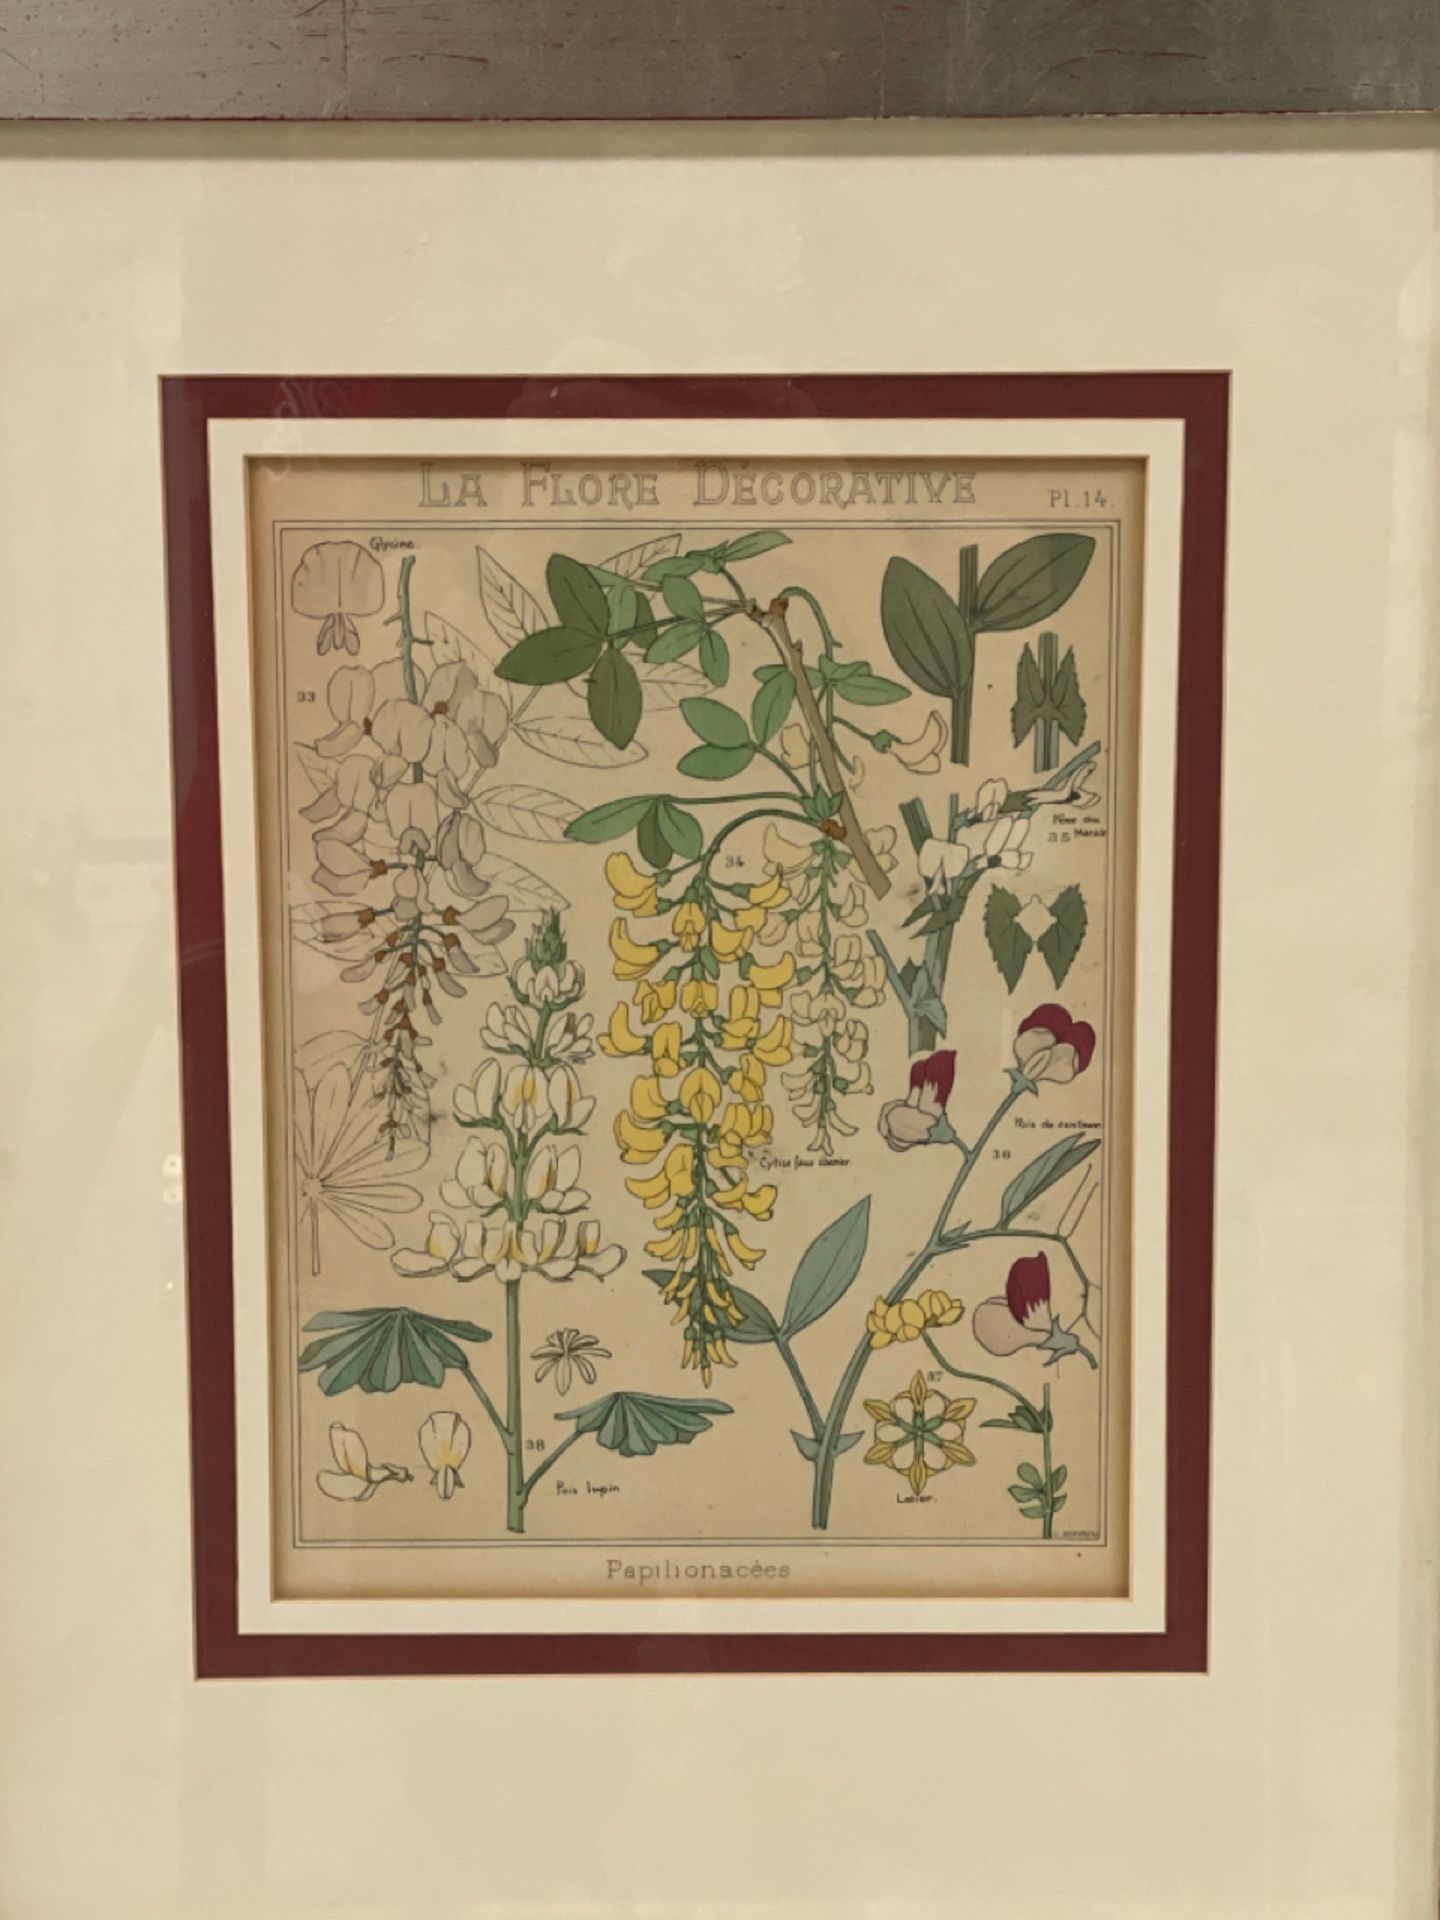 Floral Artwork Print From Claridge's Hotel - Image 2 of 2